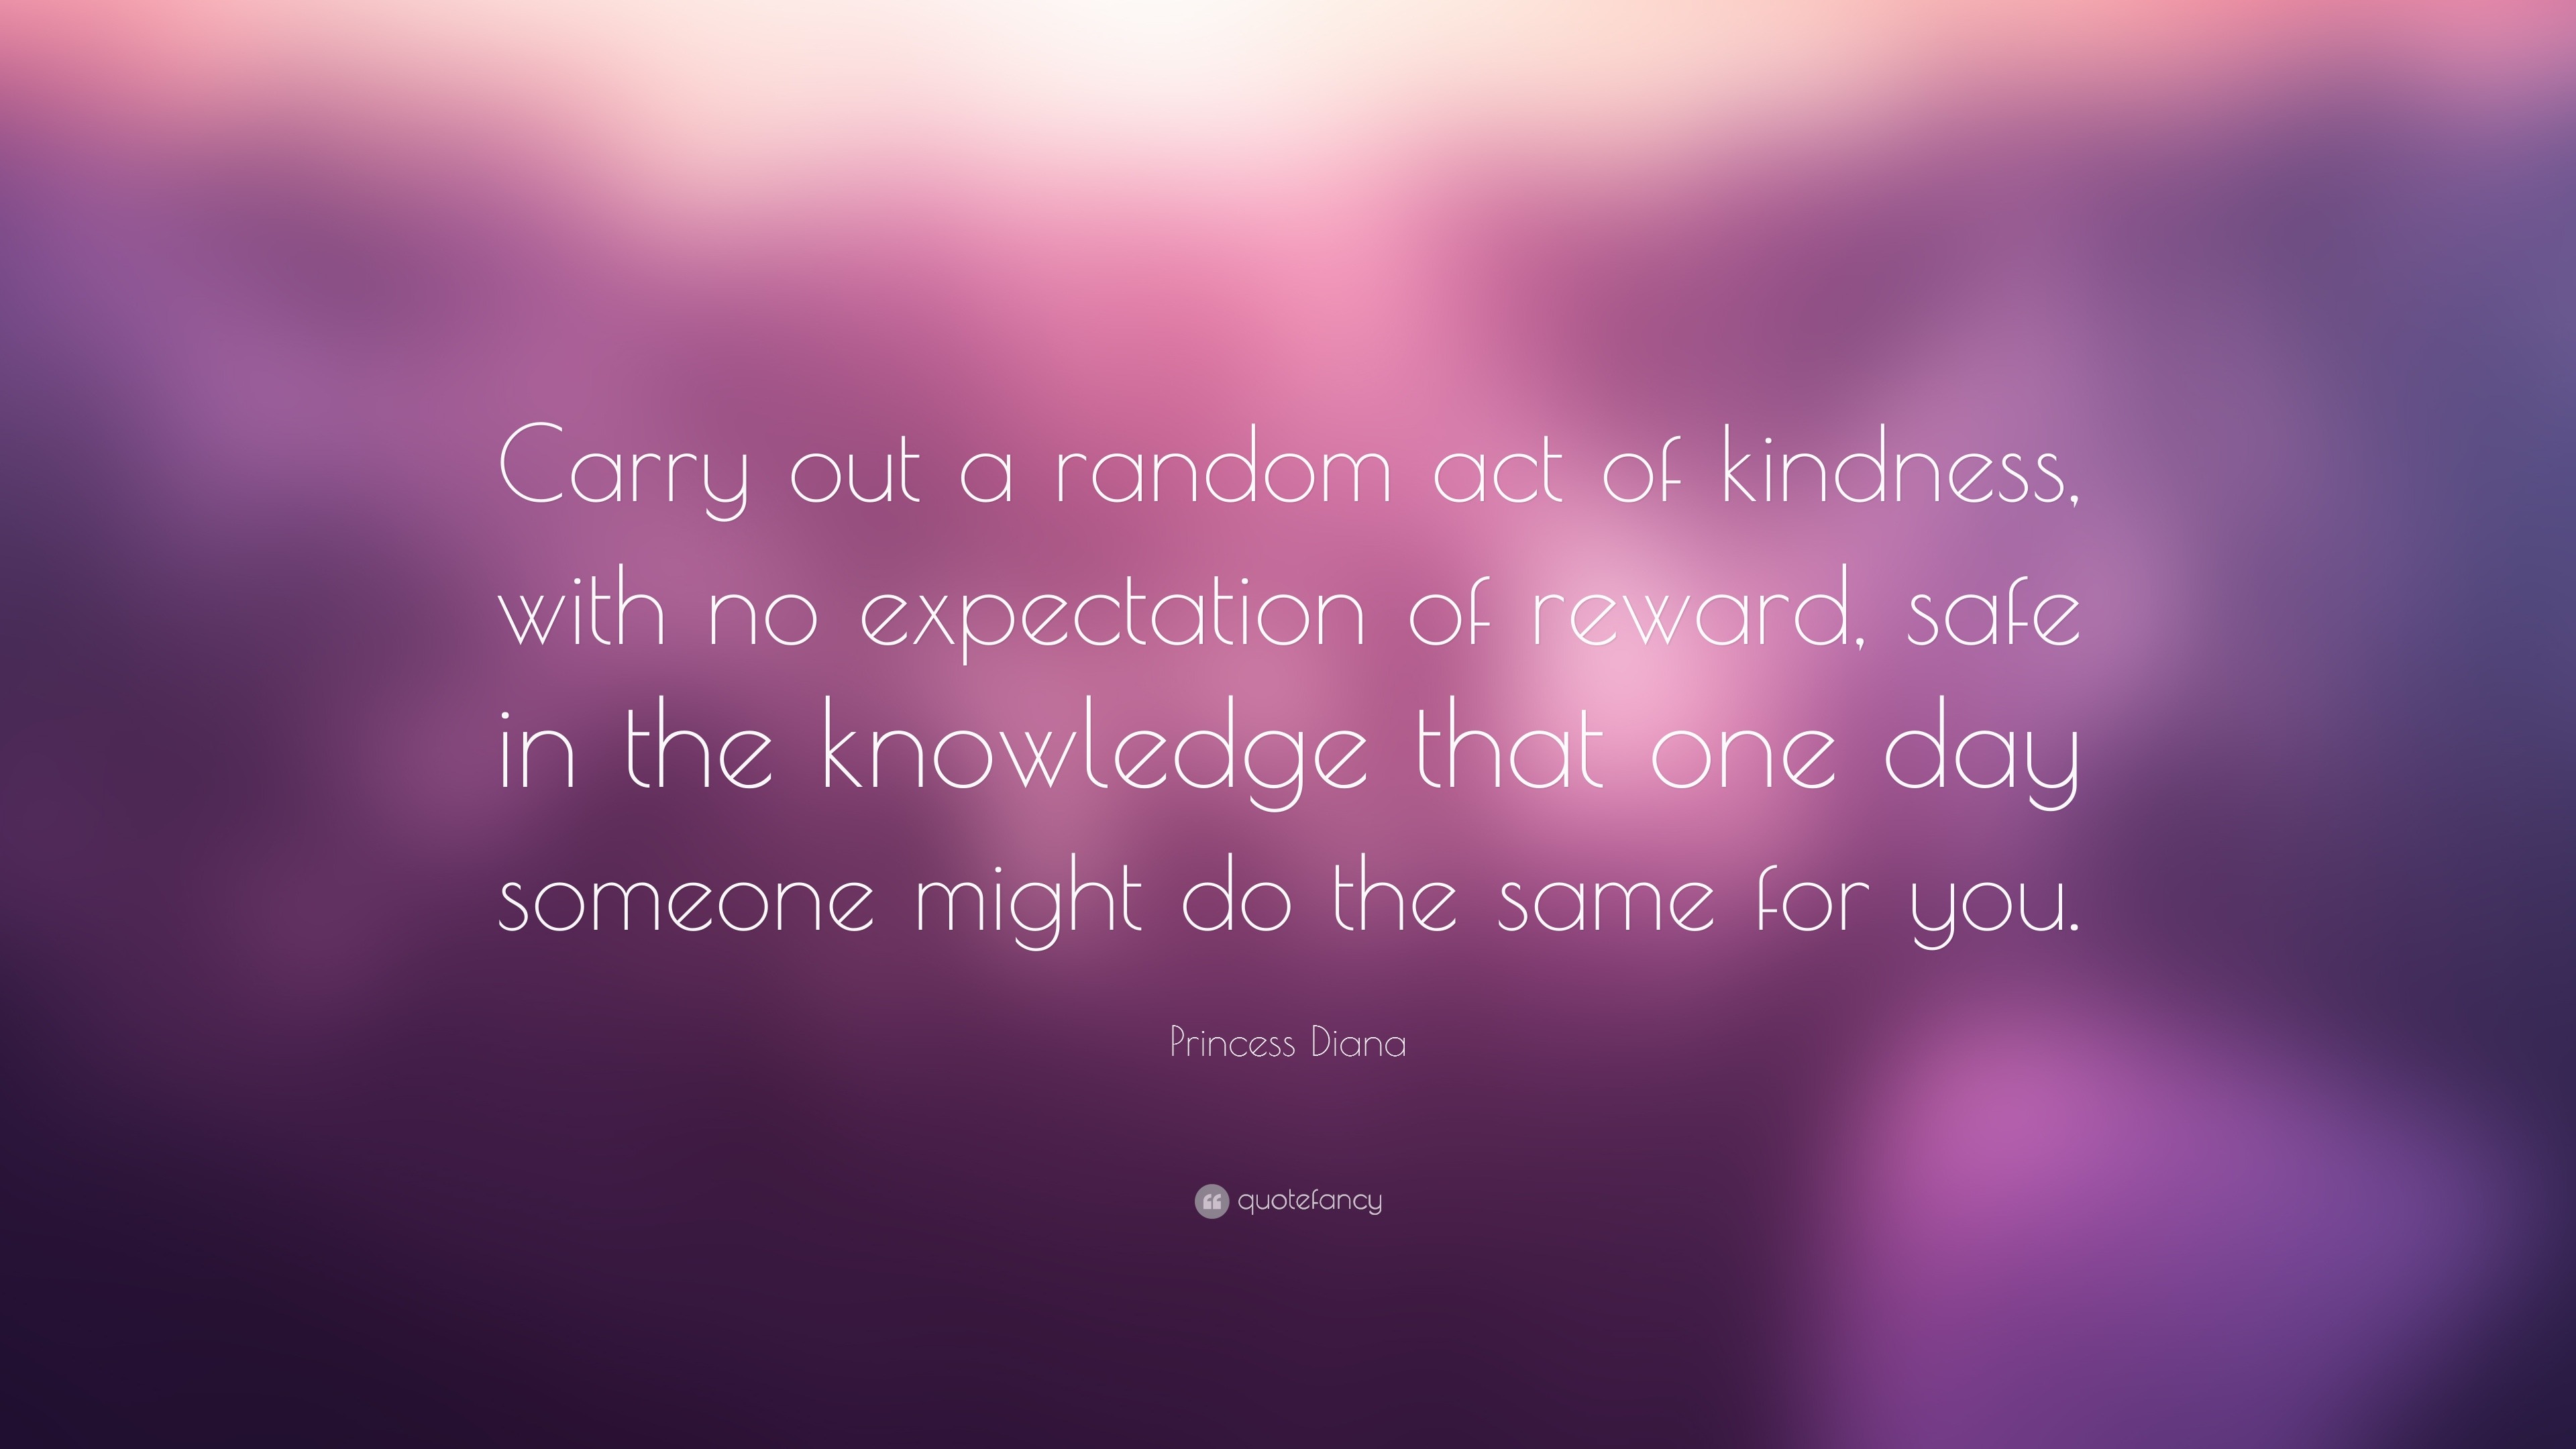 Princess Diana Quote: “Carry out a random act of kindness, with no